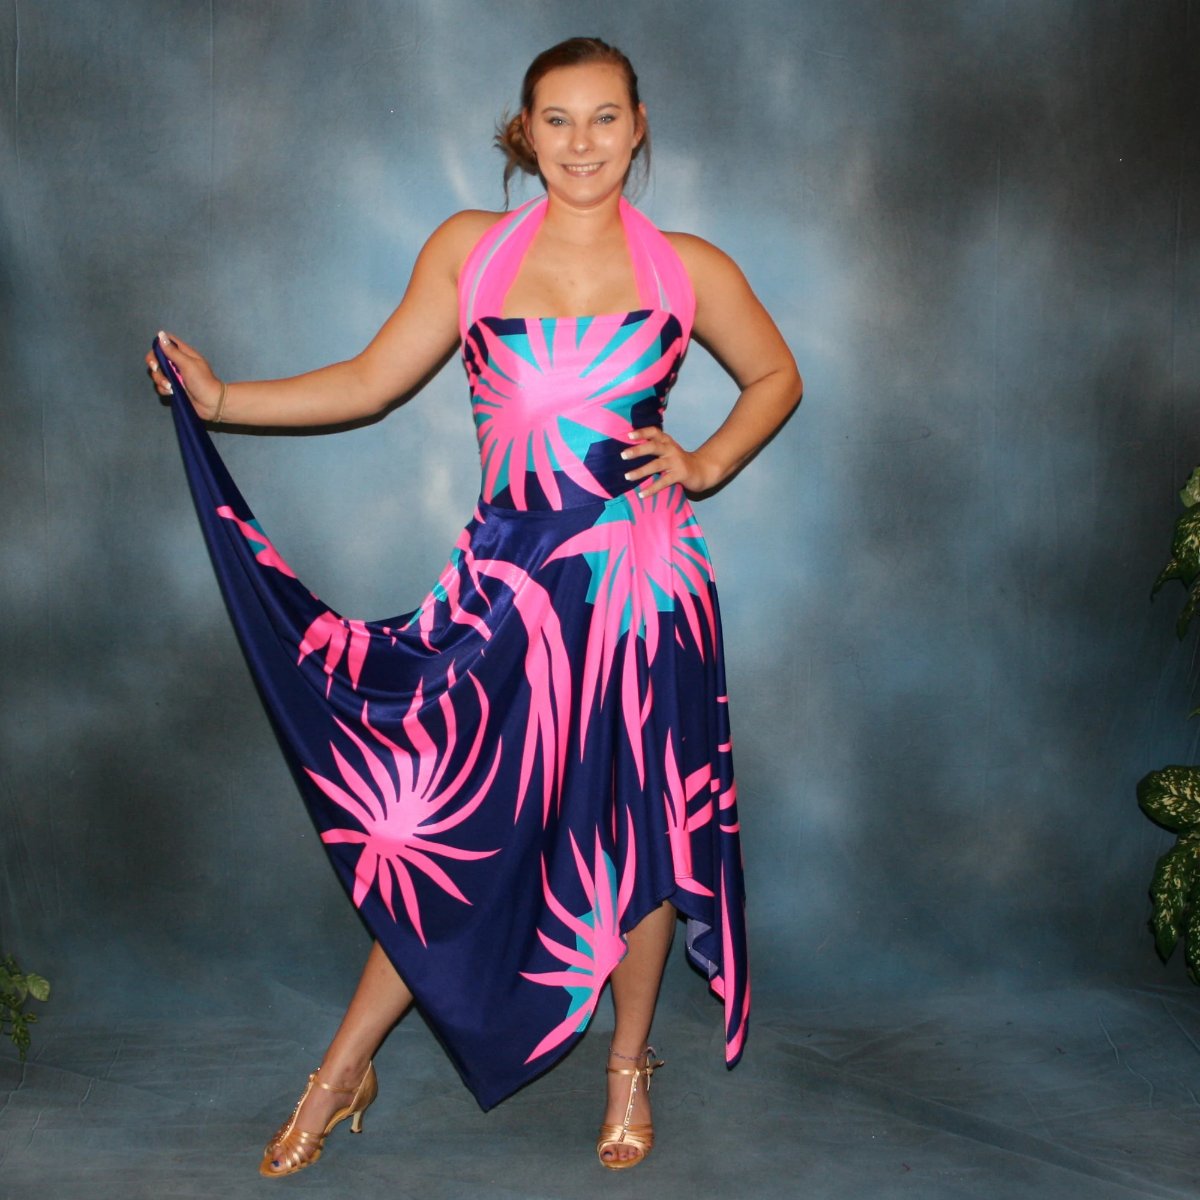 Halter bodysuit with scarf detail & flair star shaped ballroom dance skirt created in deep blue print lycra with bubble gum pink & light blue starbursts, great for any ballroom dance, practice, ballroom teachers or social event!